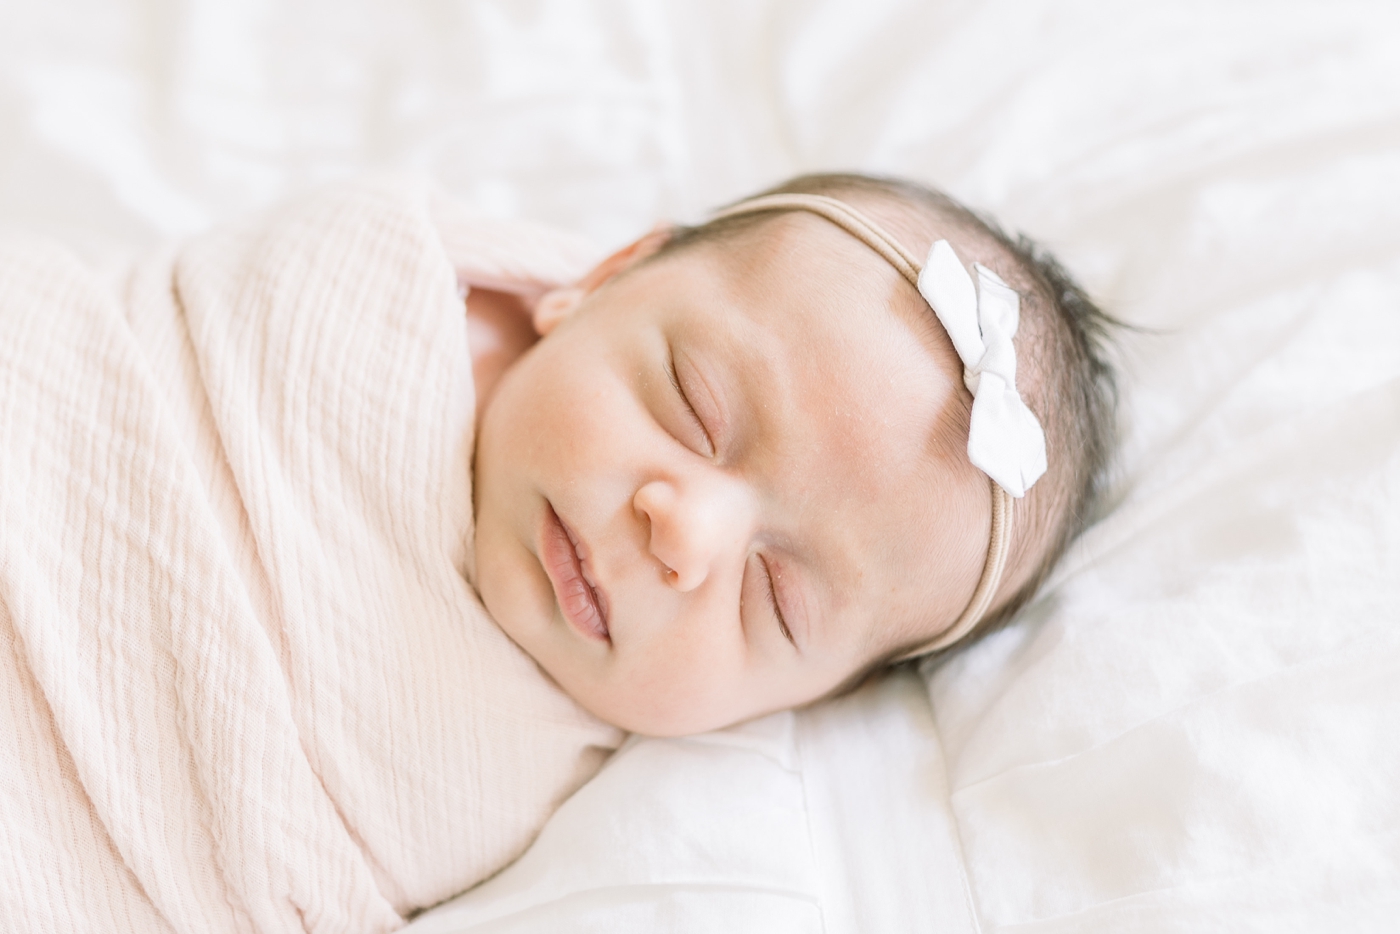 Closeup of baby sleeping during newborn session with light pink swaddle blanket. Photo by Caitlyn Motycka Photography.